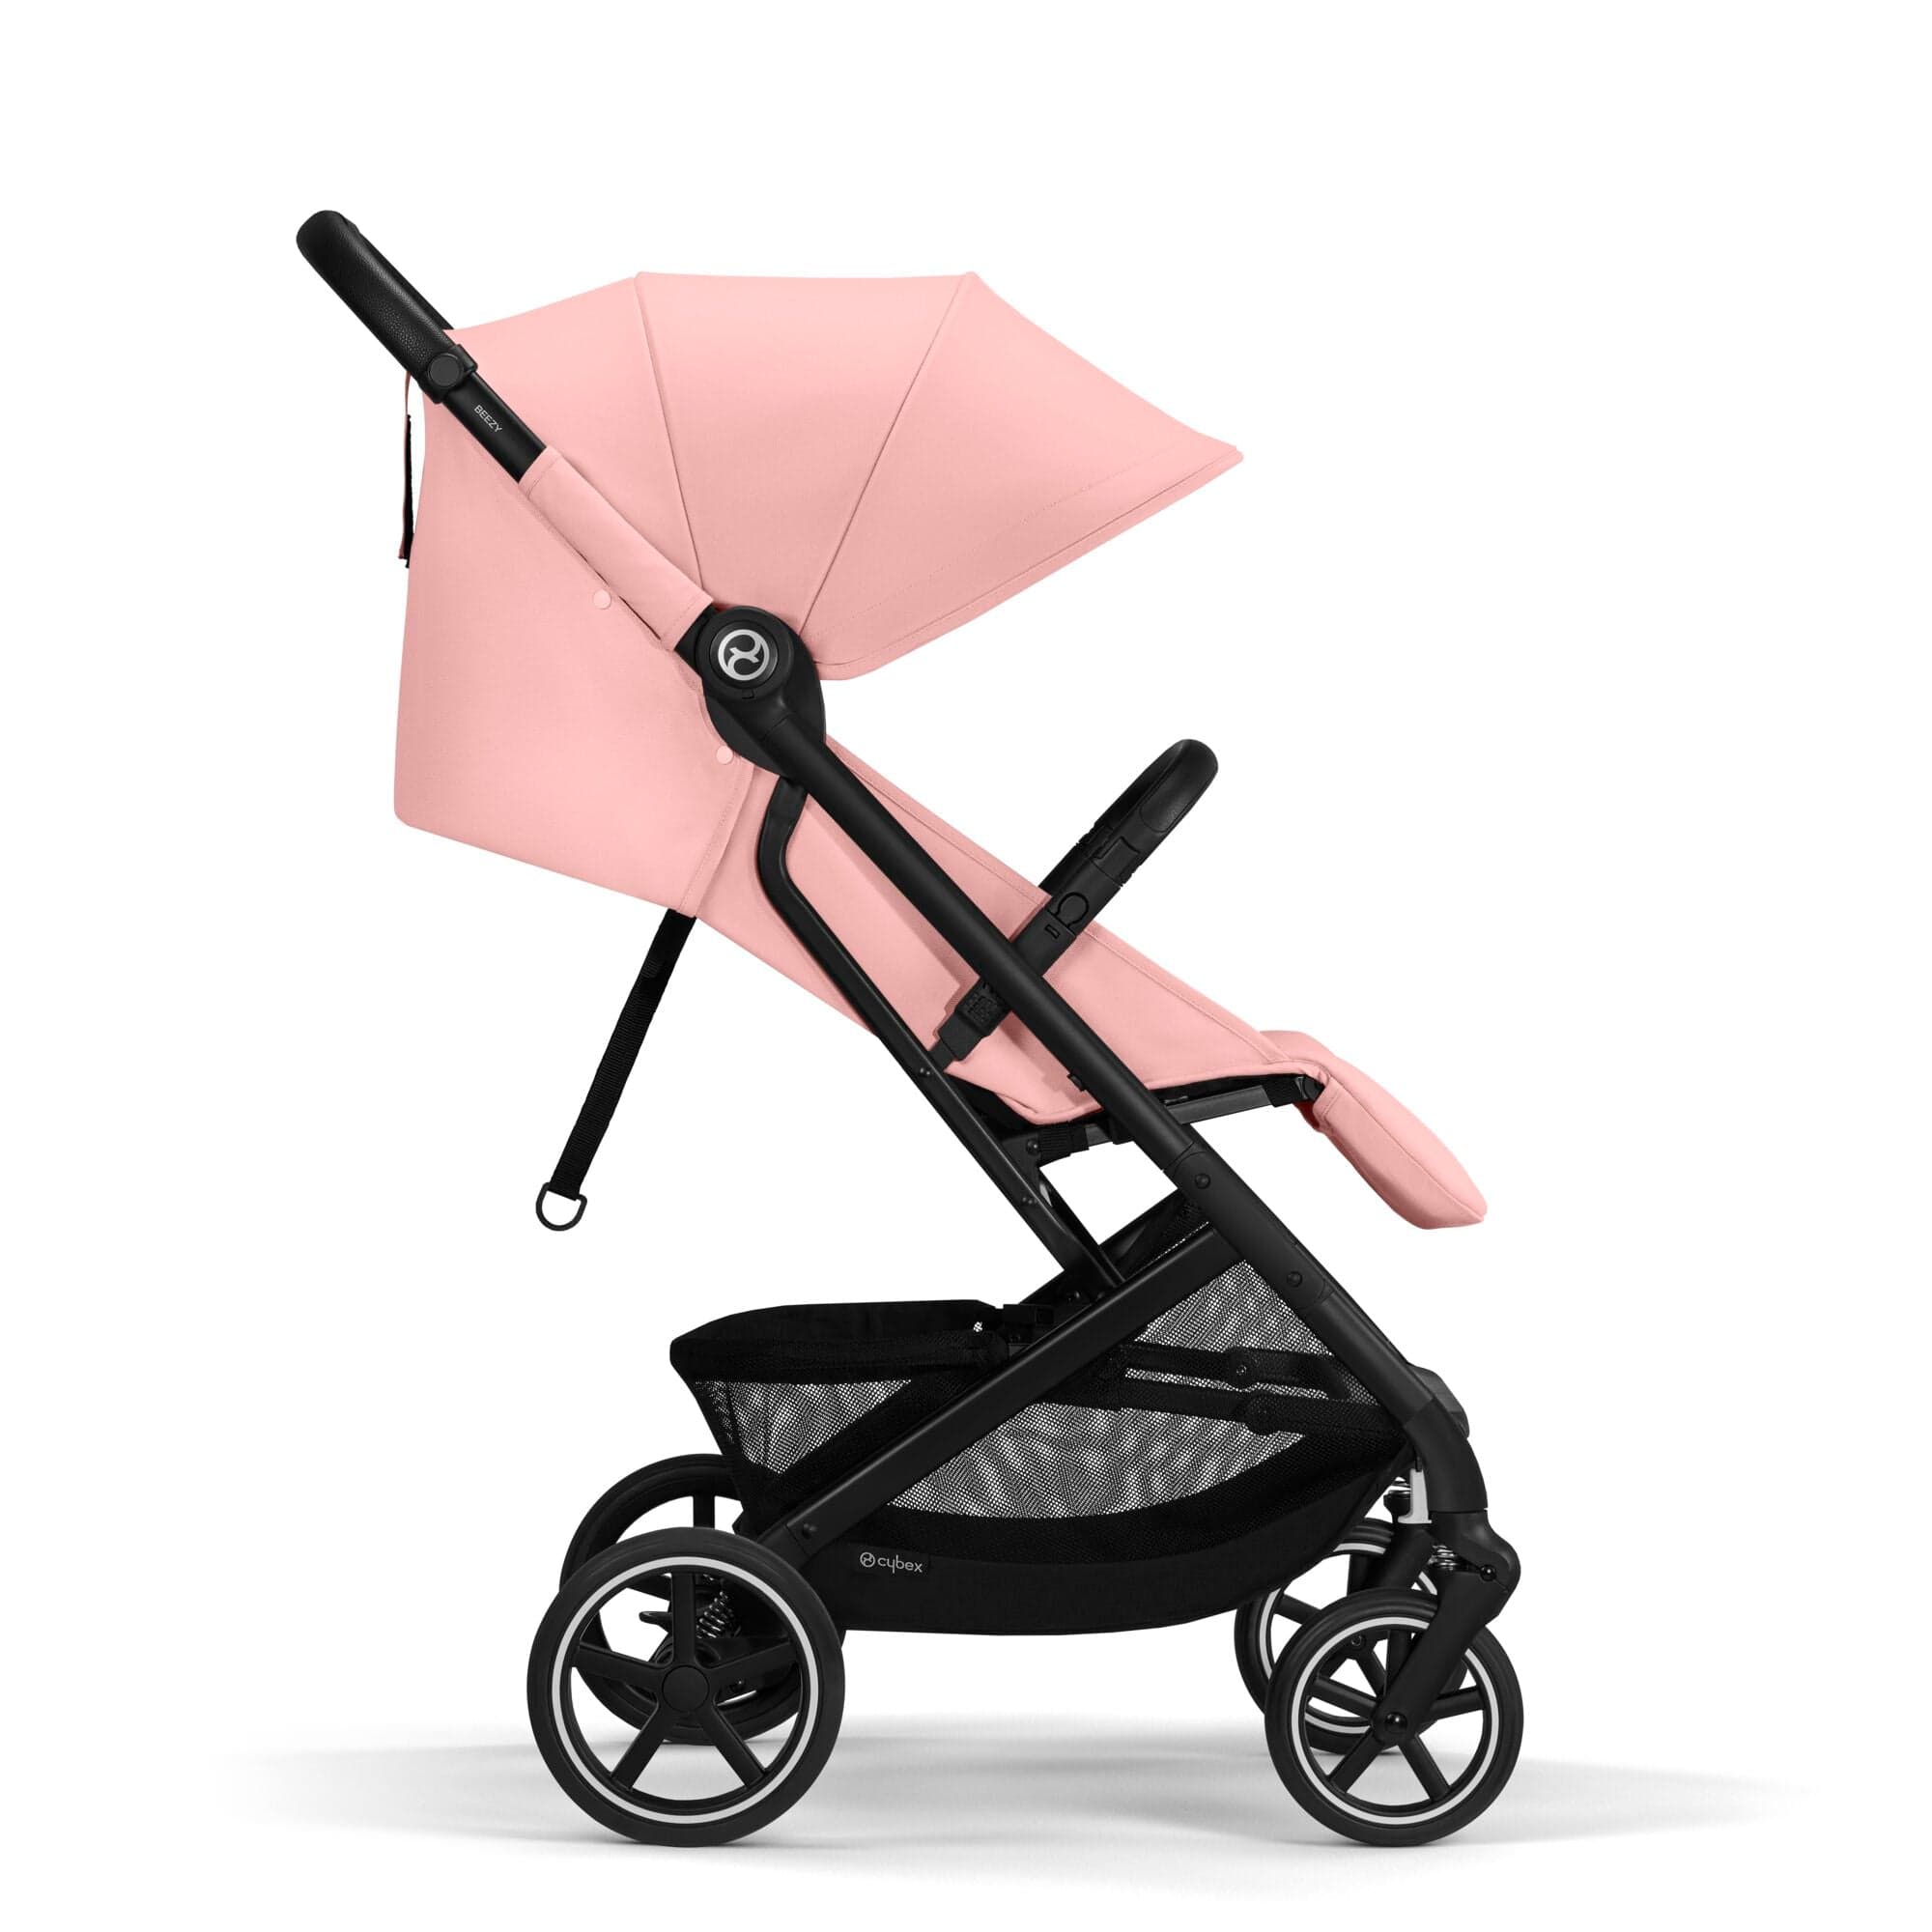 Cybex Beezy in Candy Pink/Light Pink Pushchairs & Buggies 524000179 4063846450923